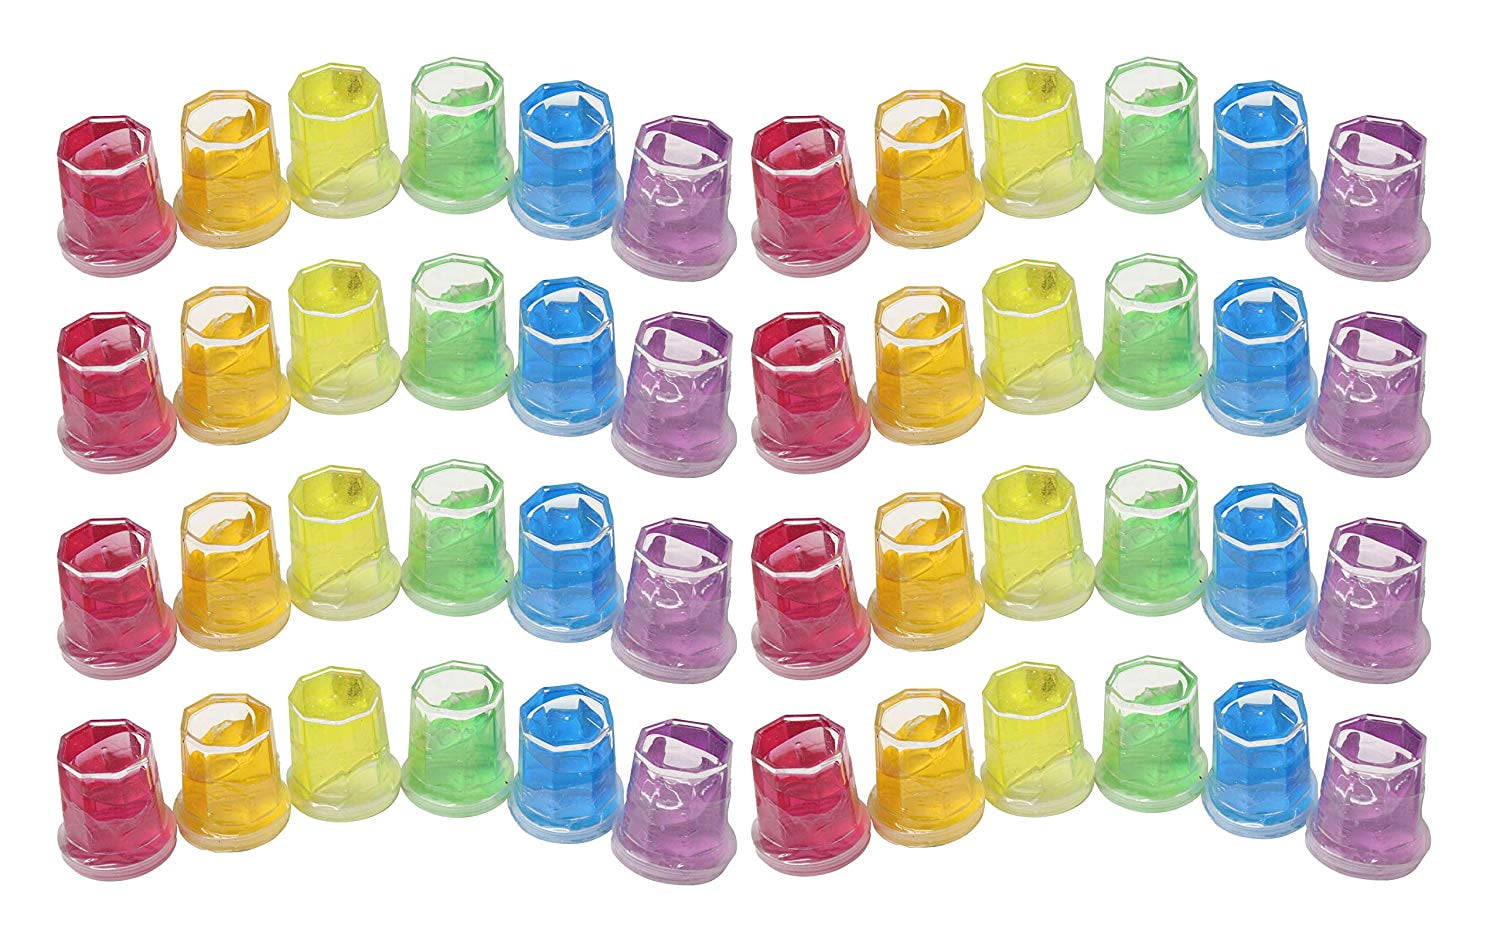 48-Pack Mega Party Favor of Slime Assorted Neon Colors for Kids Art Activity 